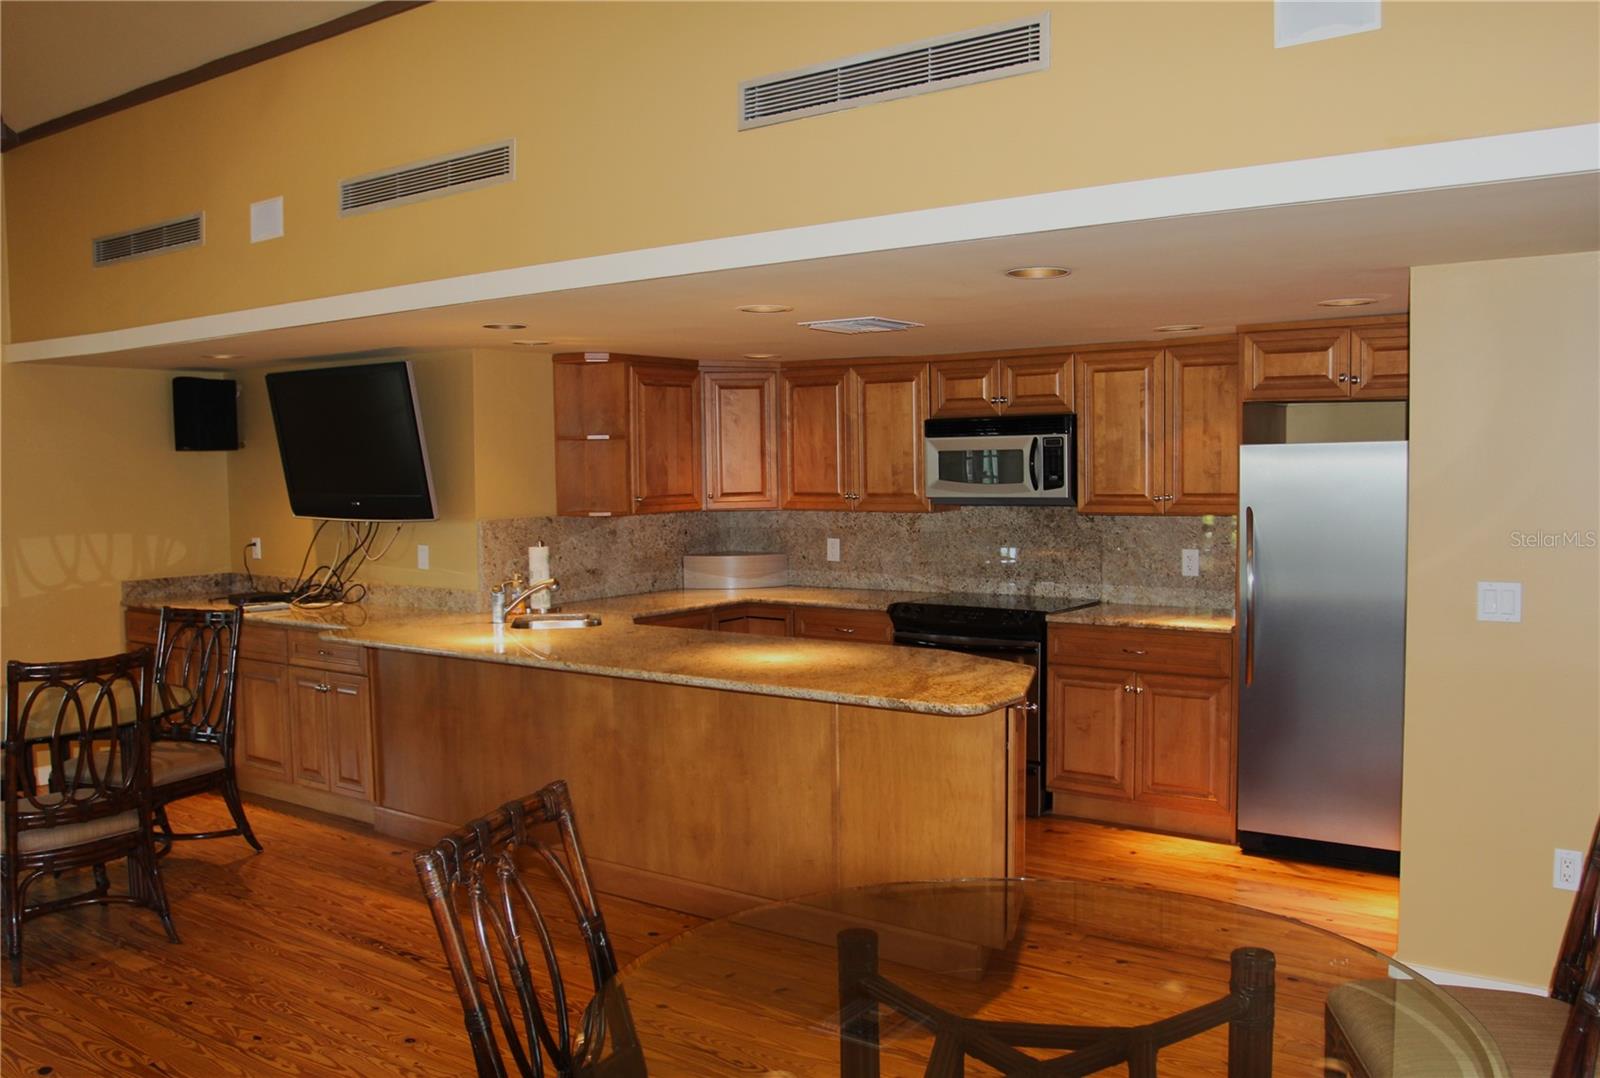 Clubhouse Comes With Fully Equipped Kitchen.